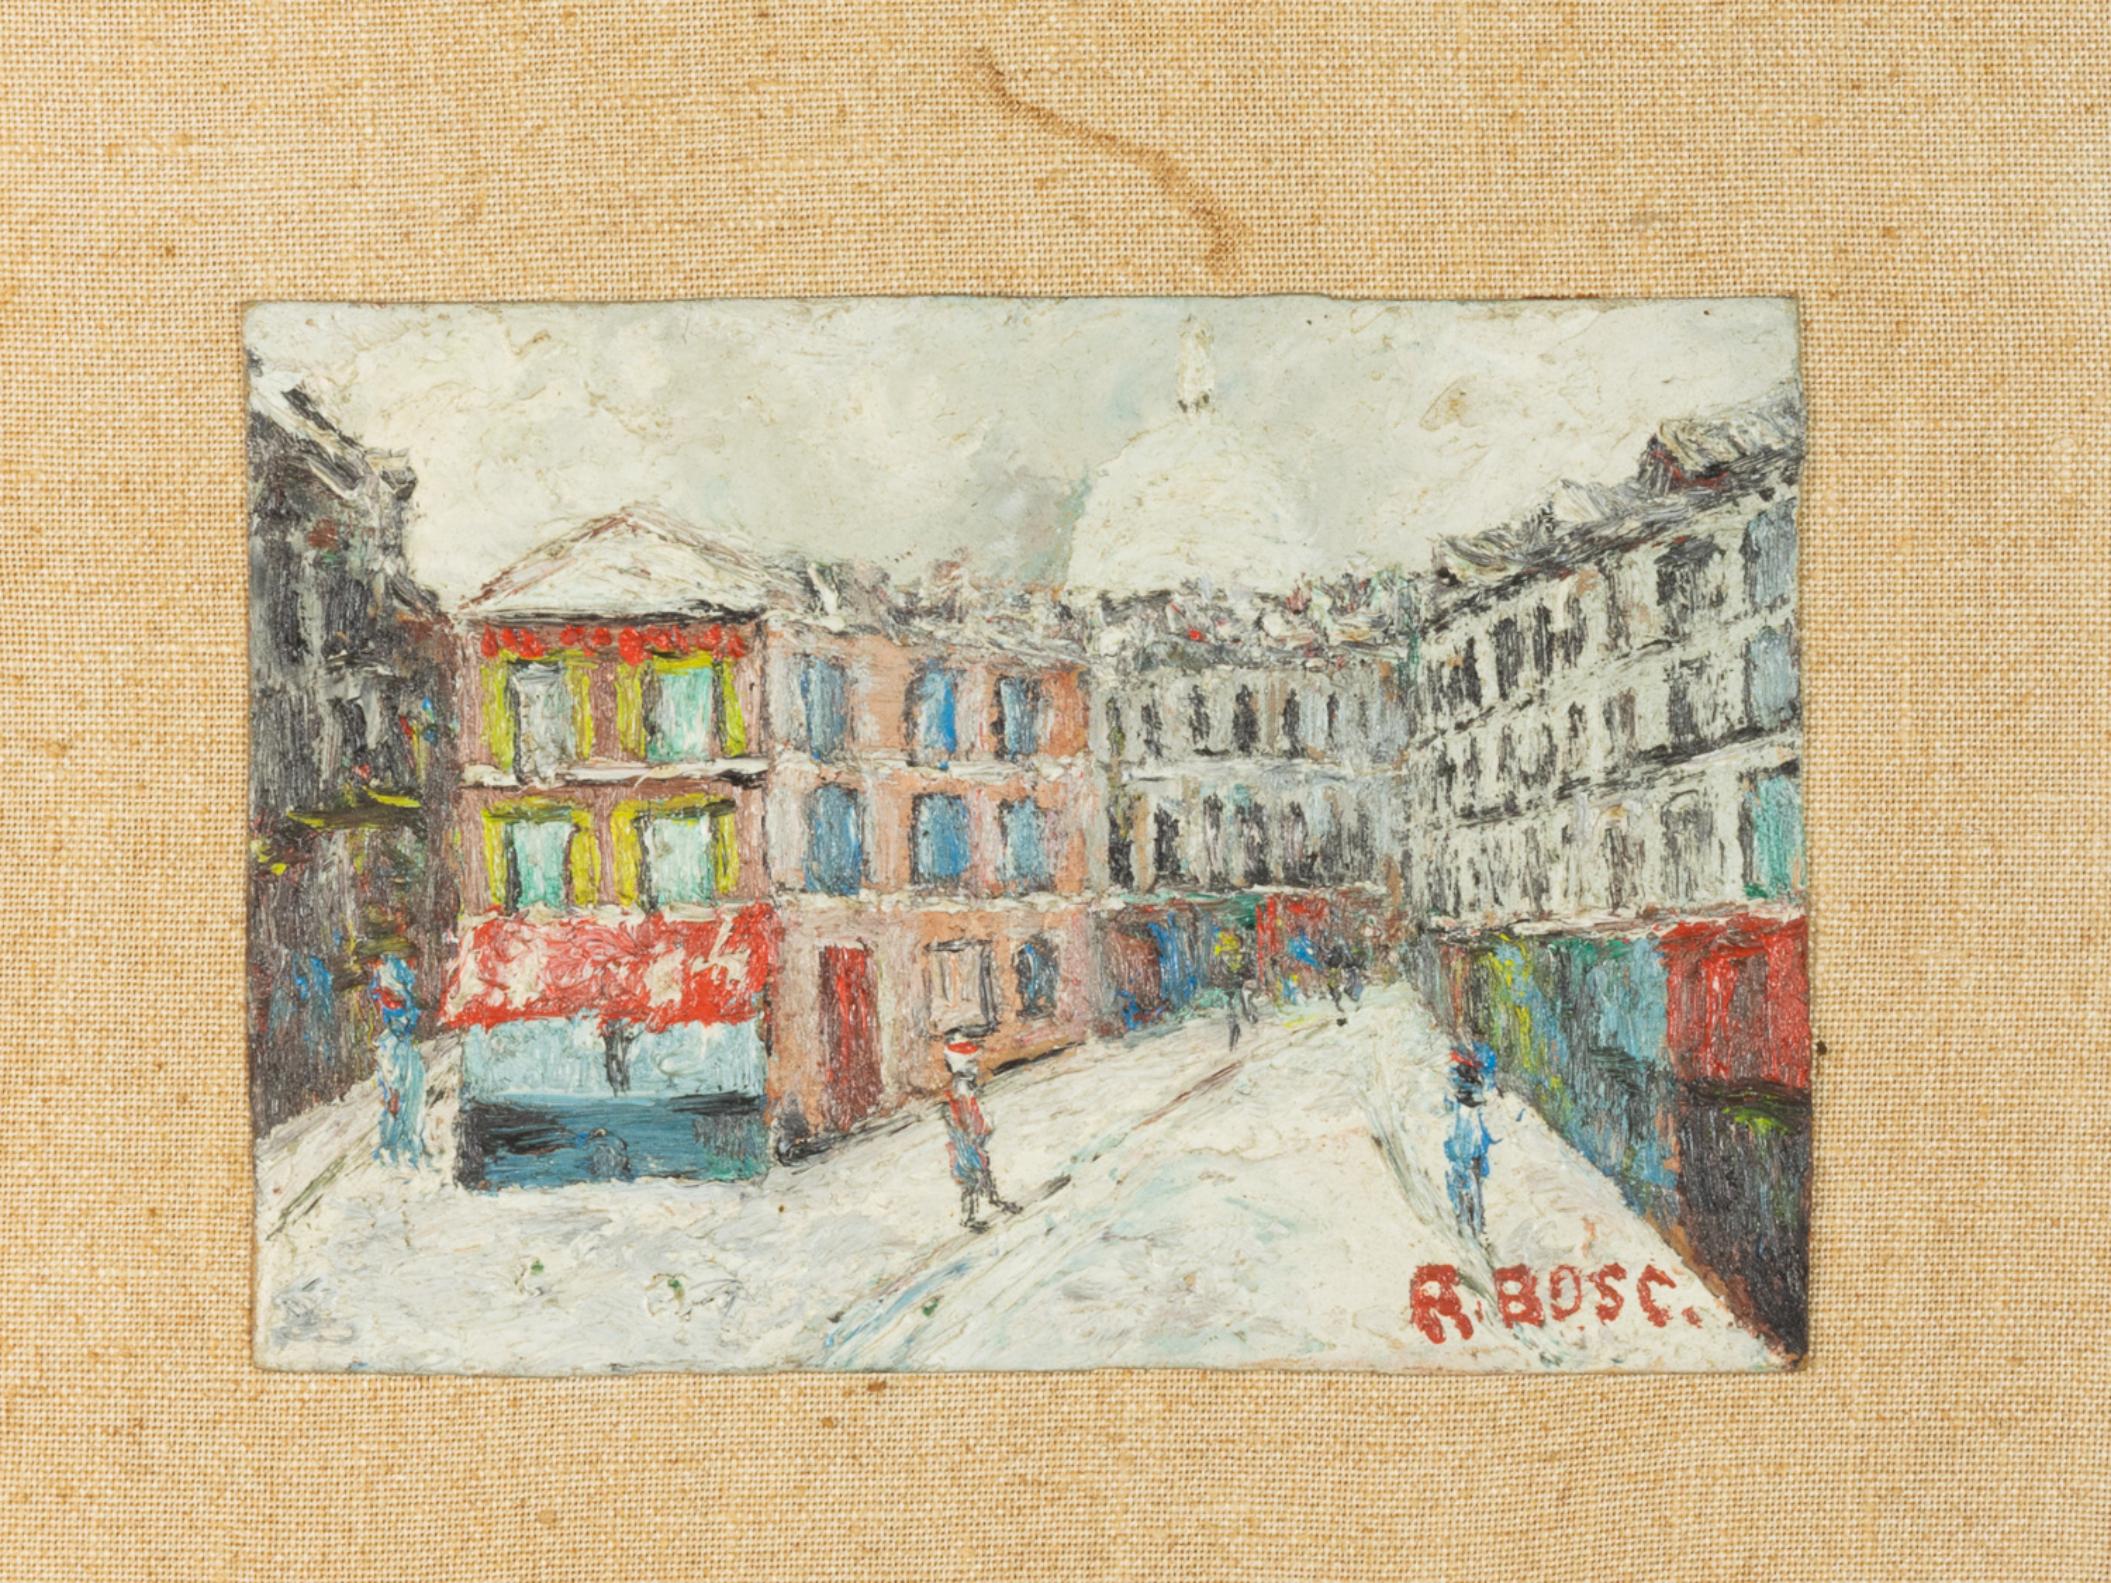 An early 20th century oil painting on a compose panel of Winter season on the streets of Montmartre, Paris with some figures moving around.
“R Bosc” signed.
Style: Post-Impressionism
Medium: Oil on Composite Panel

 Frame Width 14,37 in (36,5 cm)